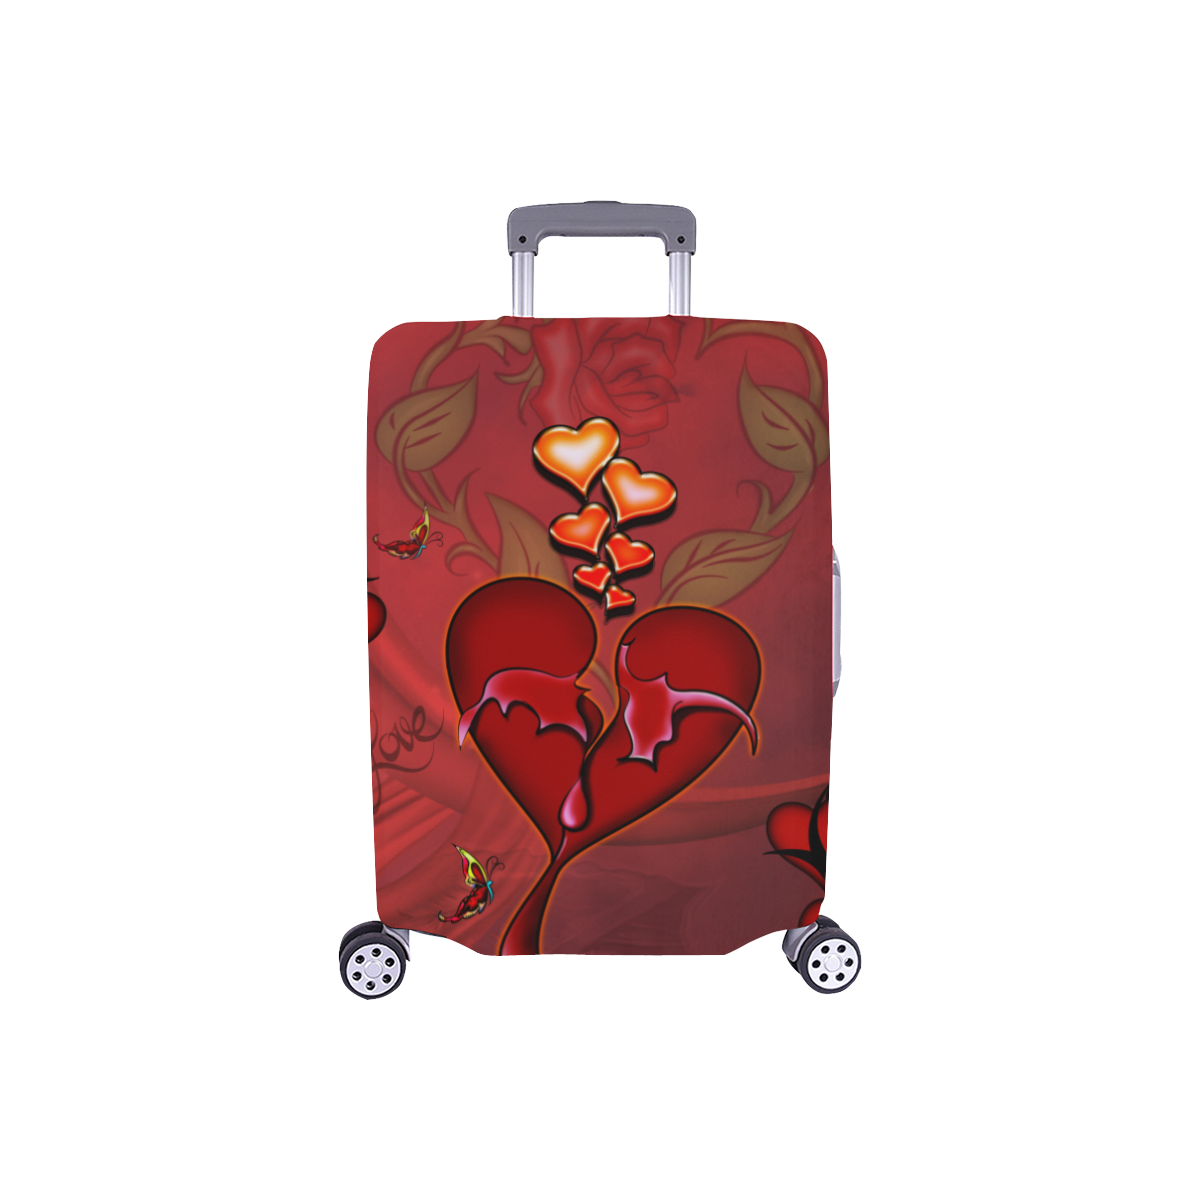 Wonderful hearts Luggage Cover/Small 18"-21"